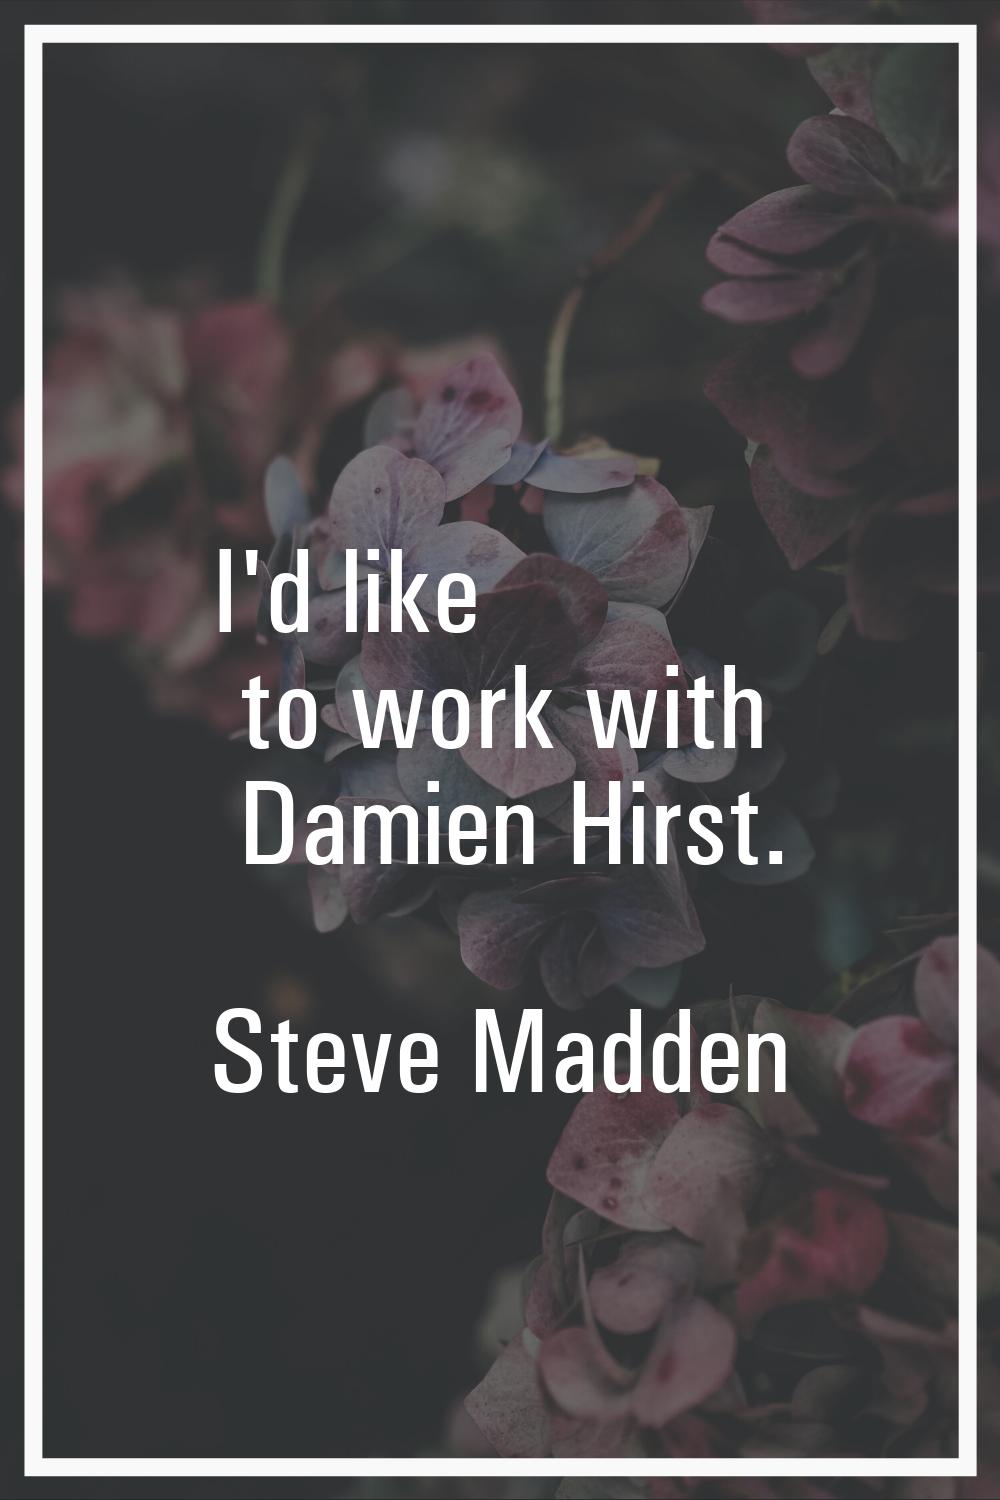 I'd like to work with Damien Hirst.